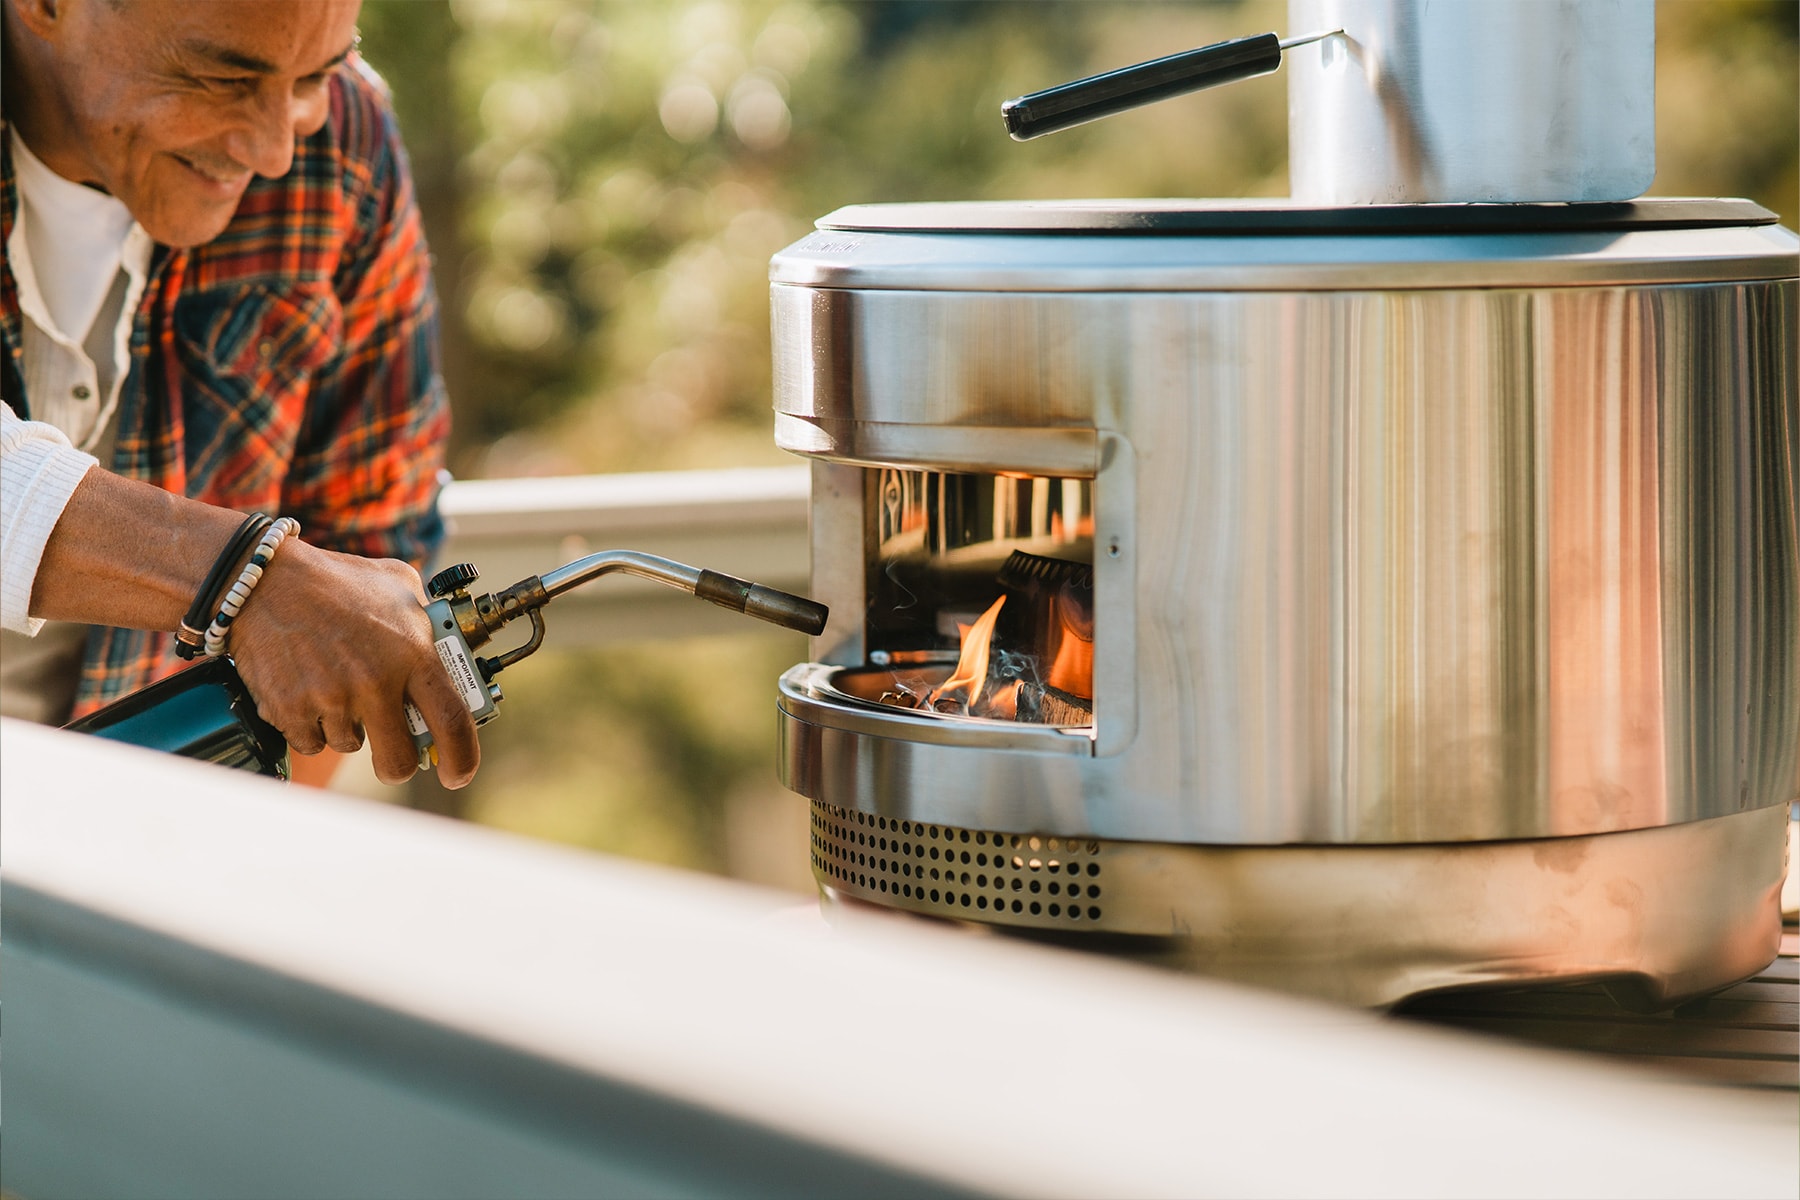 Solo Stove's New Portable Pizza Oven Allows You to Make Pies Anywhere –  Robb Report